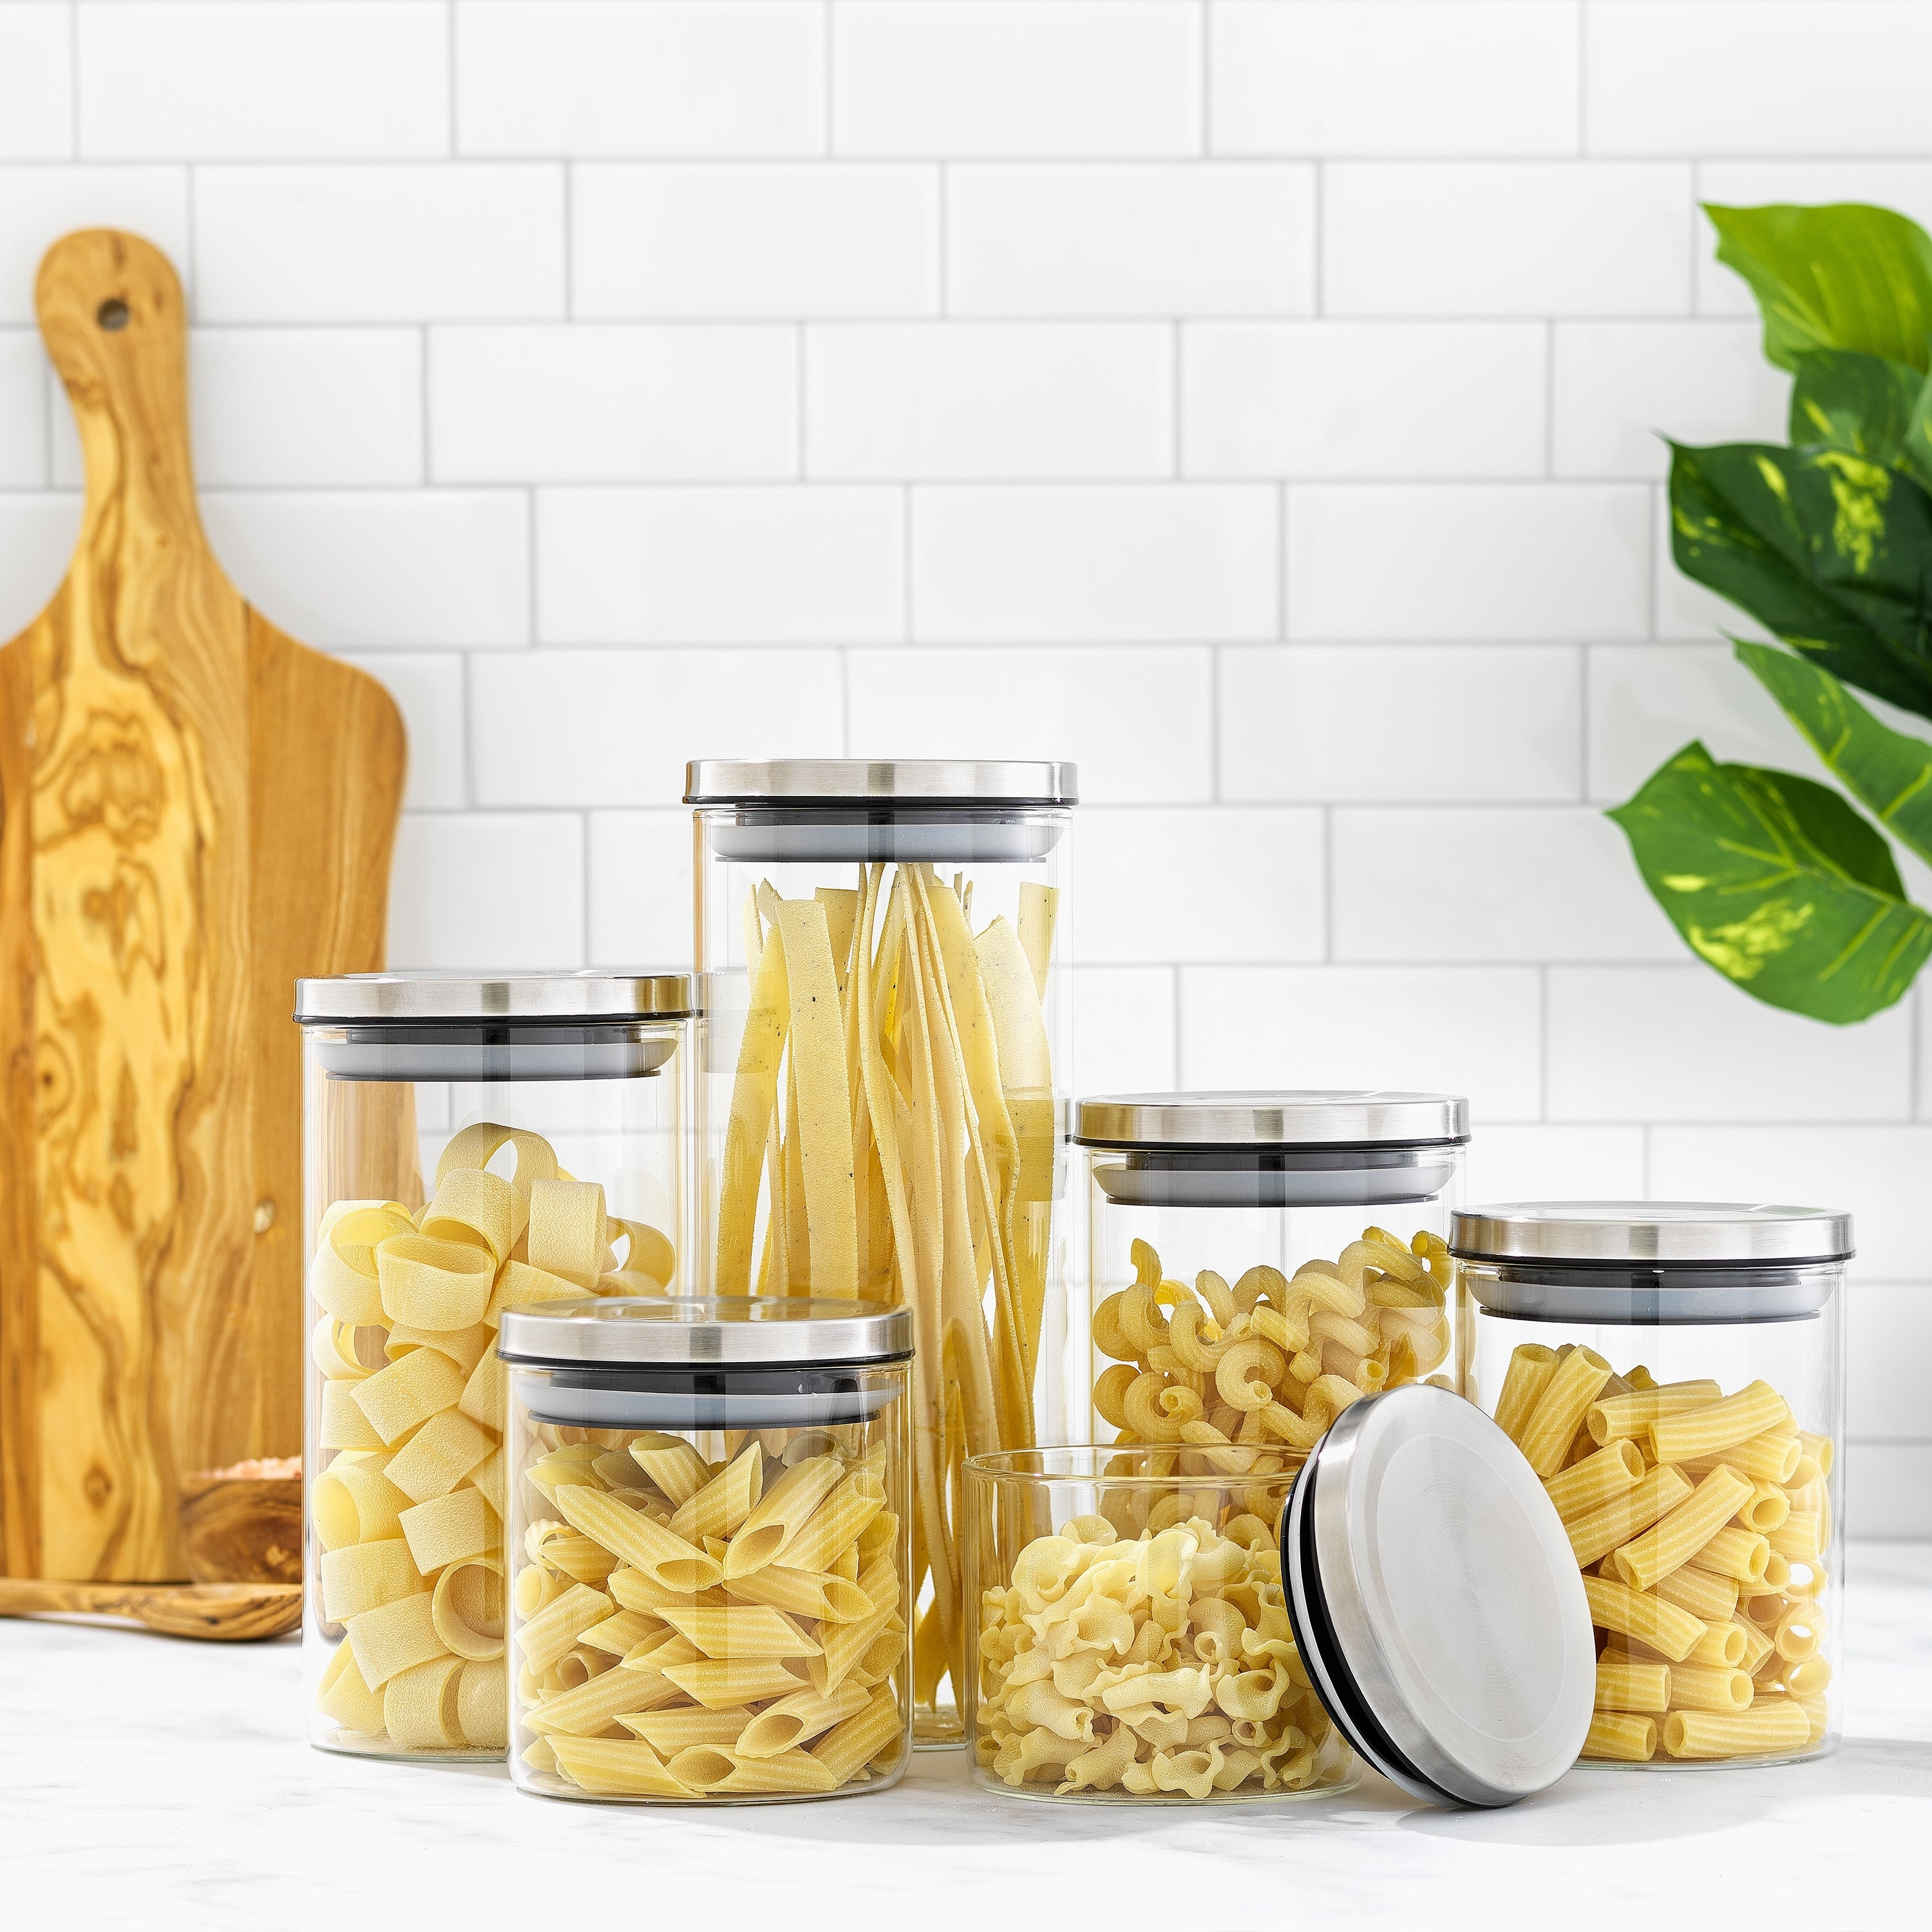 https://ak1.ostkcdn.com/images/products/is/images/direct/2c742805e0a65c8dac504750a4aa95f1a447e5e1/JoyJolt-Kitchen-Canister-Glass-Jars-Food-Storage-Containers-with-Airtight-Lids-Set-of-6.jpg